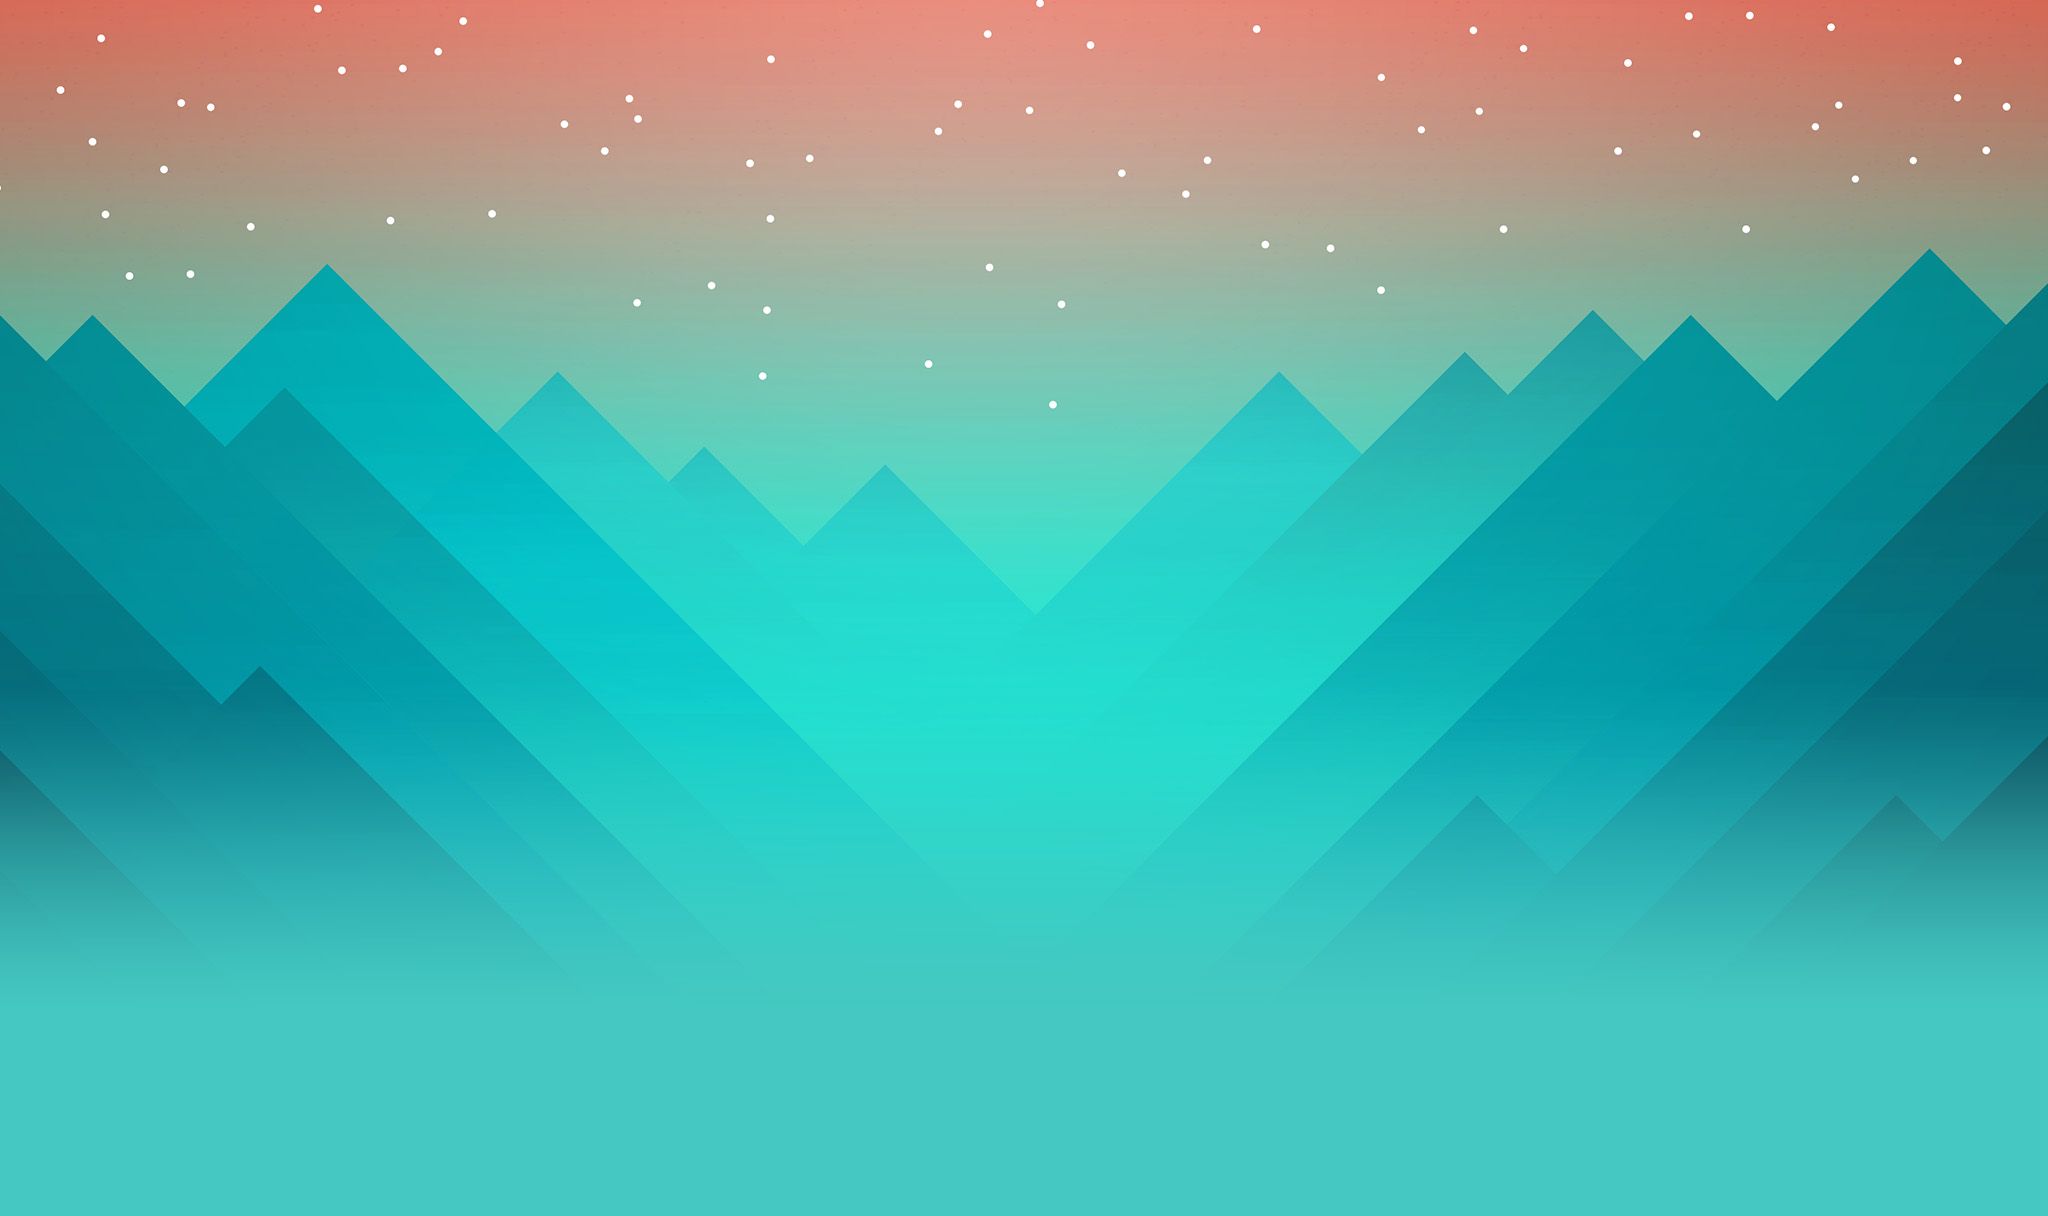 Monument Valley game by ustwo. Monument valley game, Valley game, Wallpaper